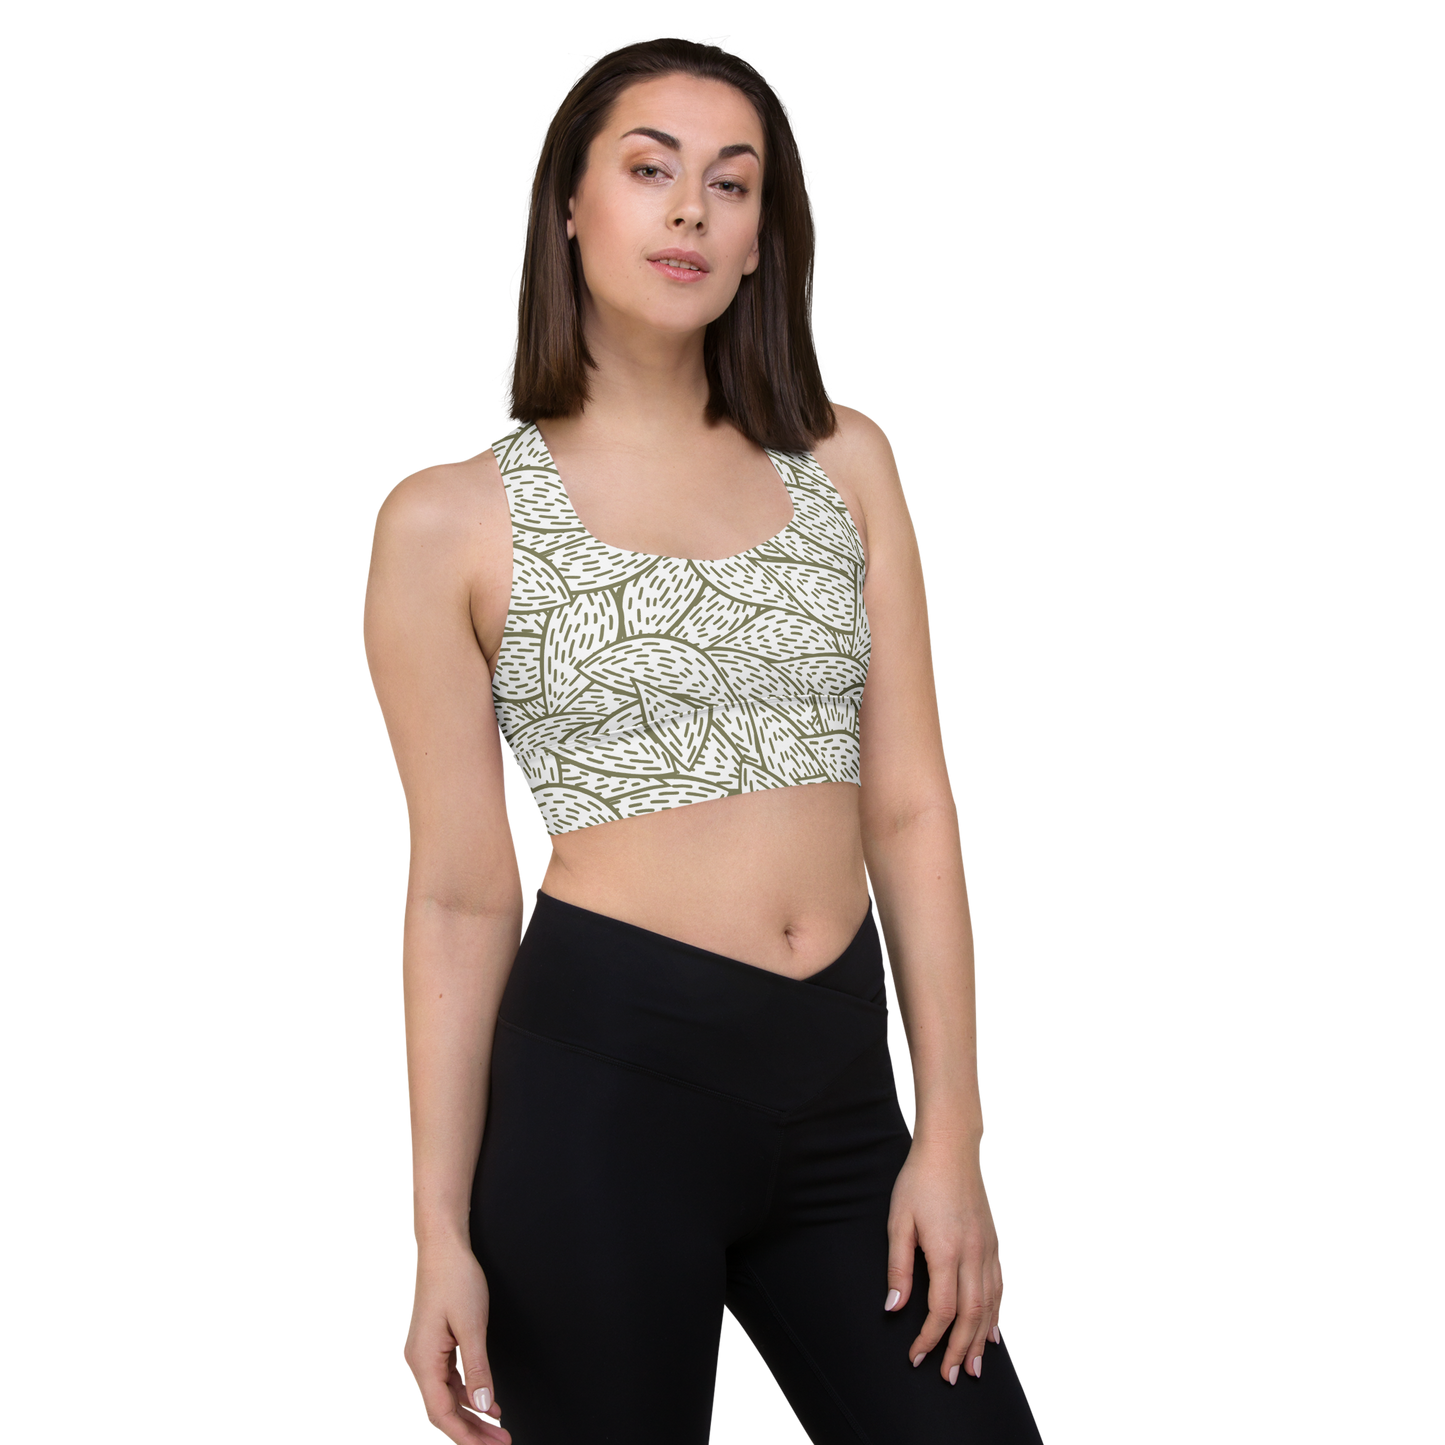 Colorful Fall Leaves | Seamless Patterns | All-Over Print Longline Sports Bra - #6